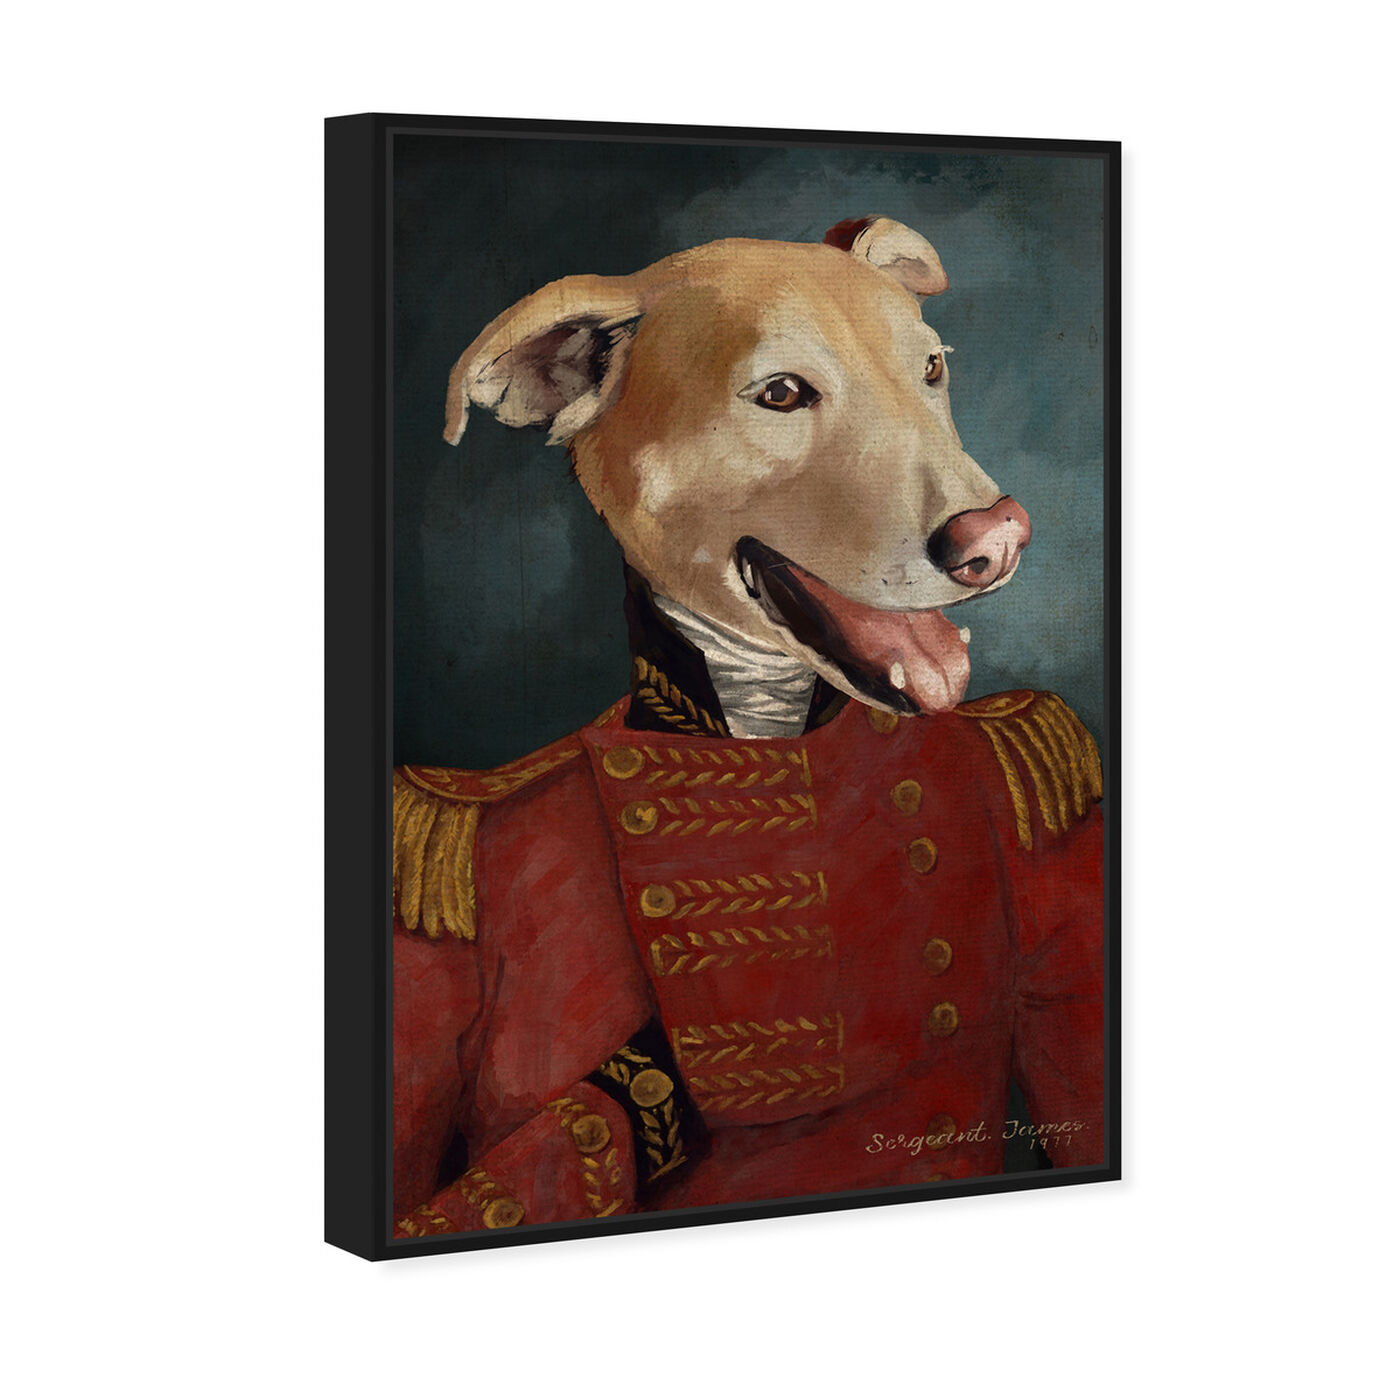 Angled view of Dapper Sergeant featuring animals and dogs and puppies art.